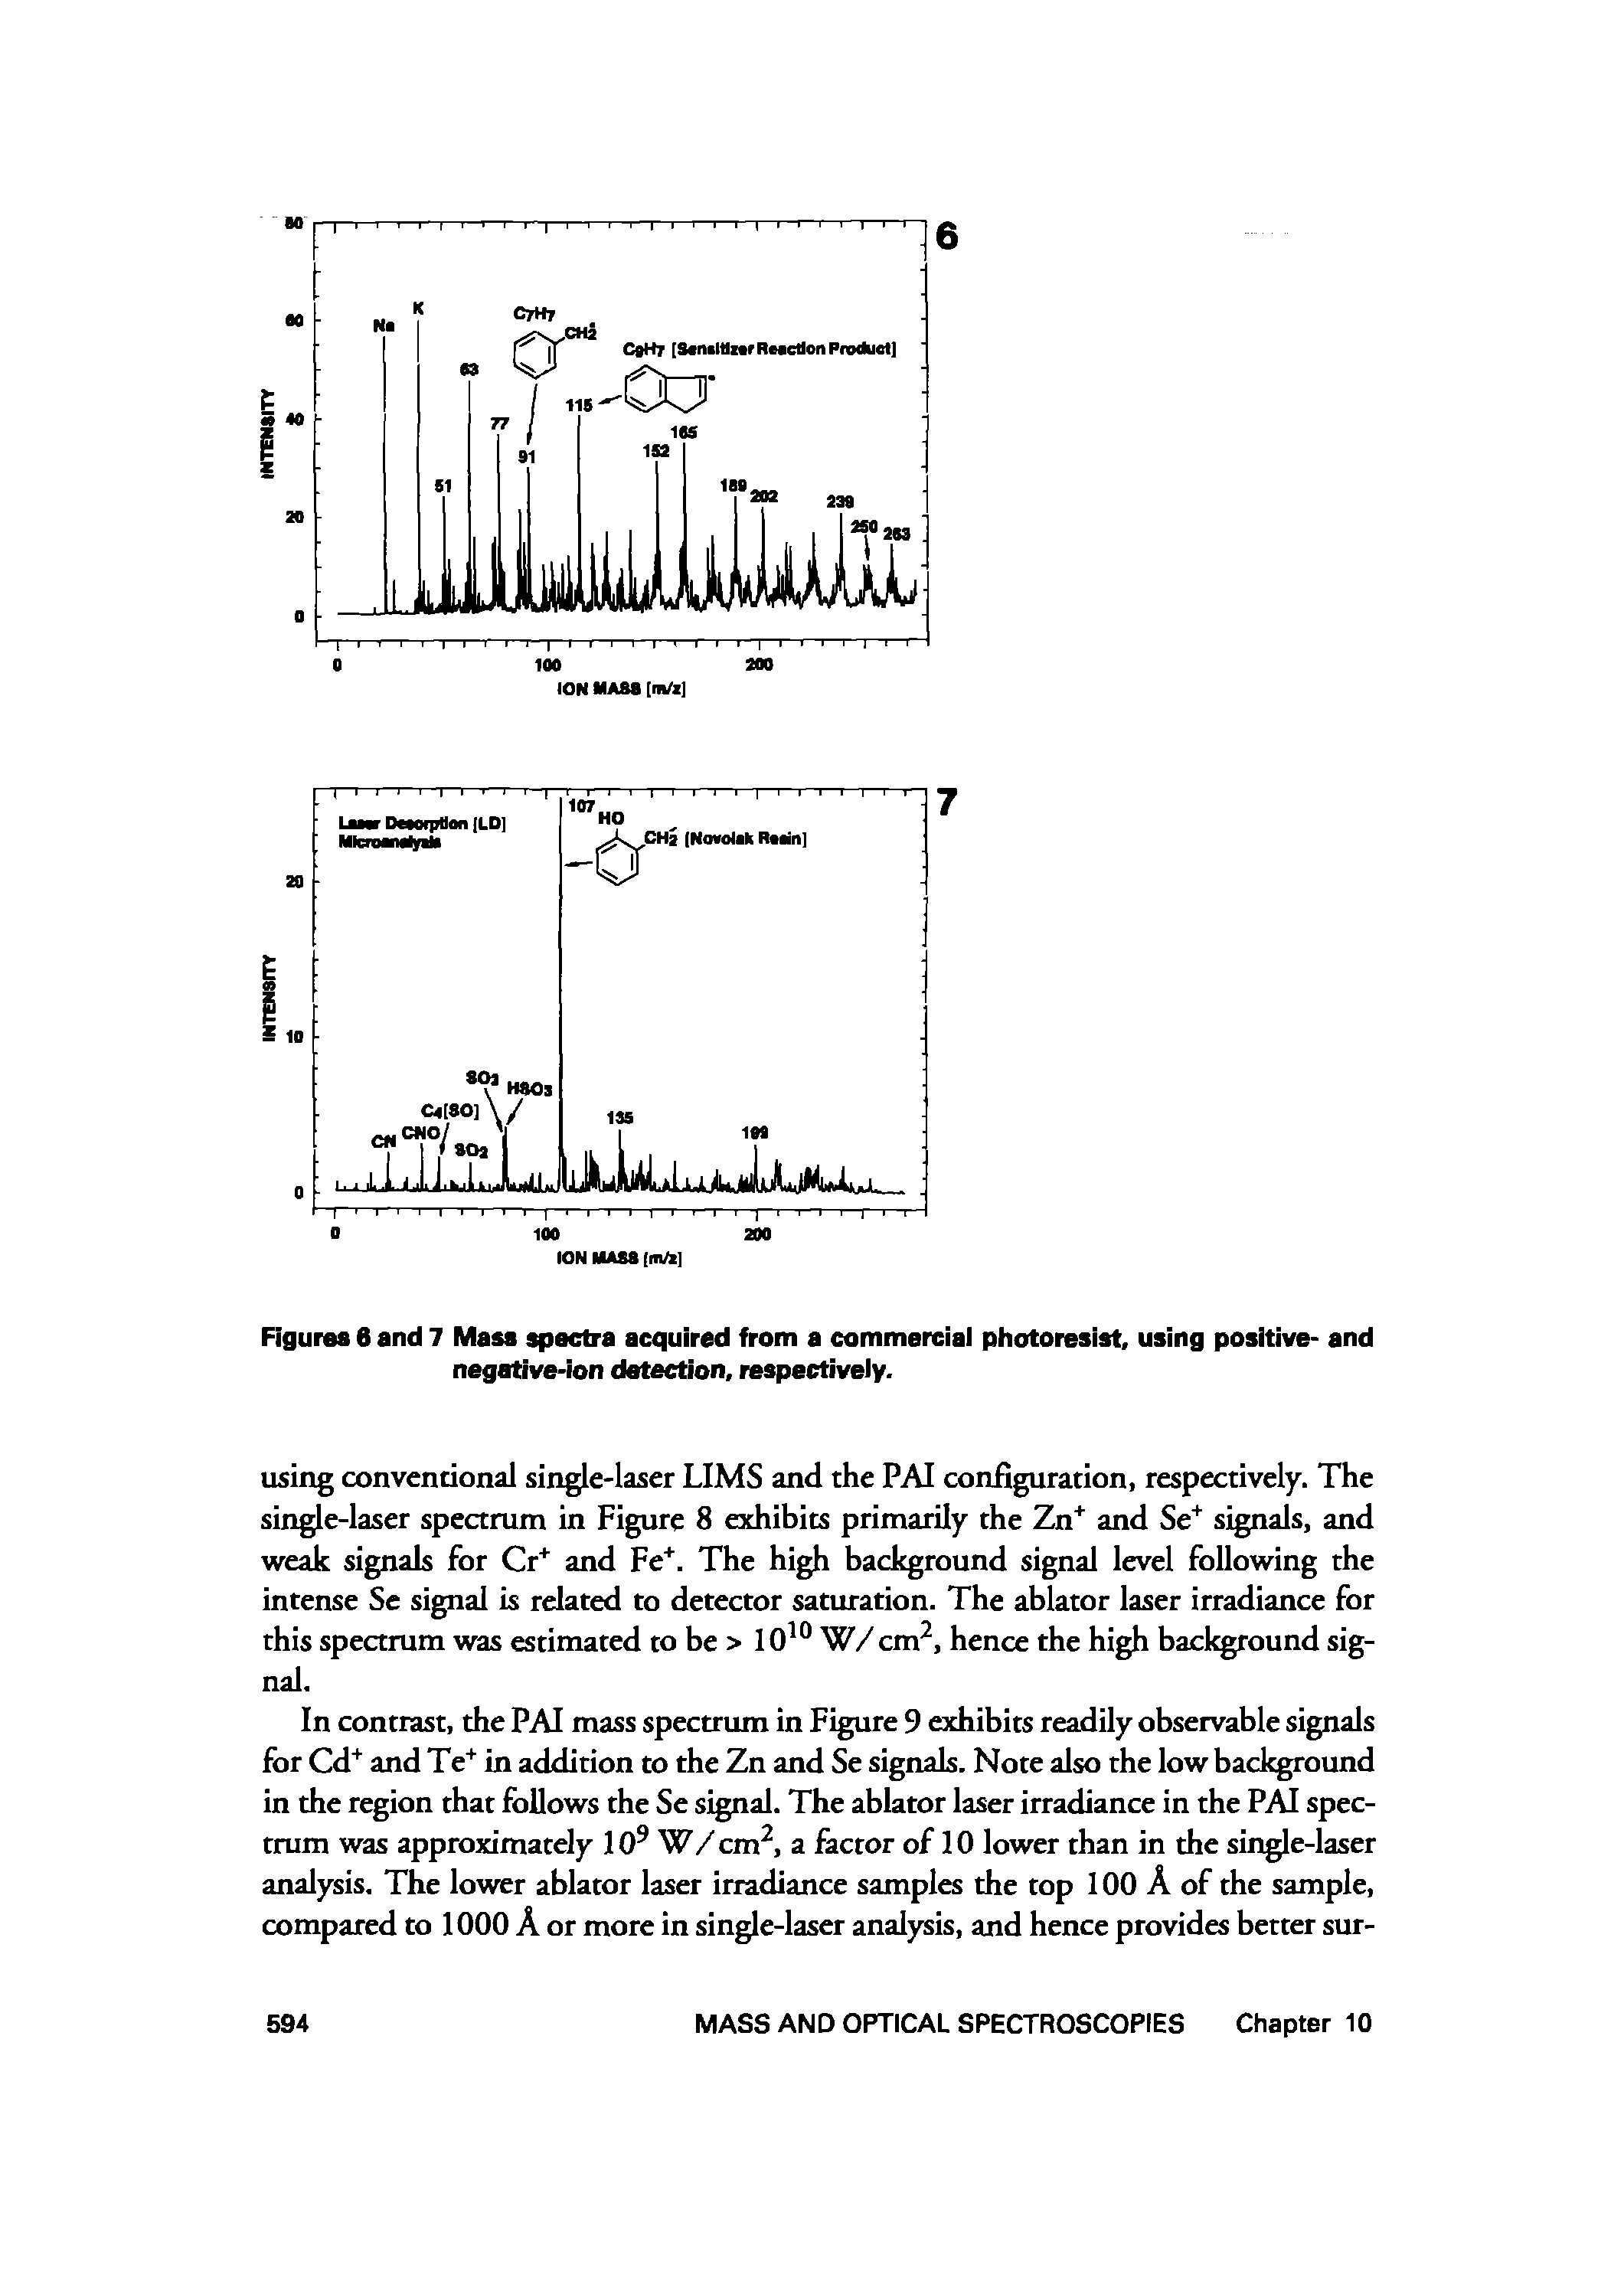 Figuras 6 and 7 Mass spectra acquired from a commercial photoresist, using positive- and negative-ion detection, respectively.